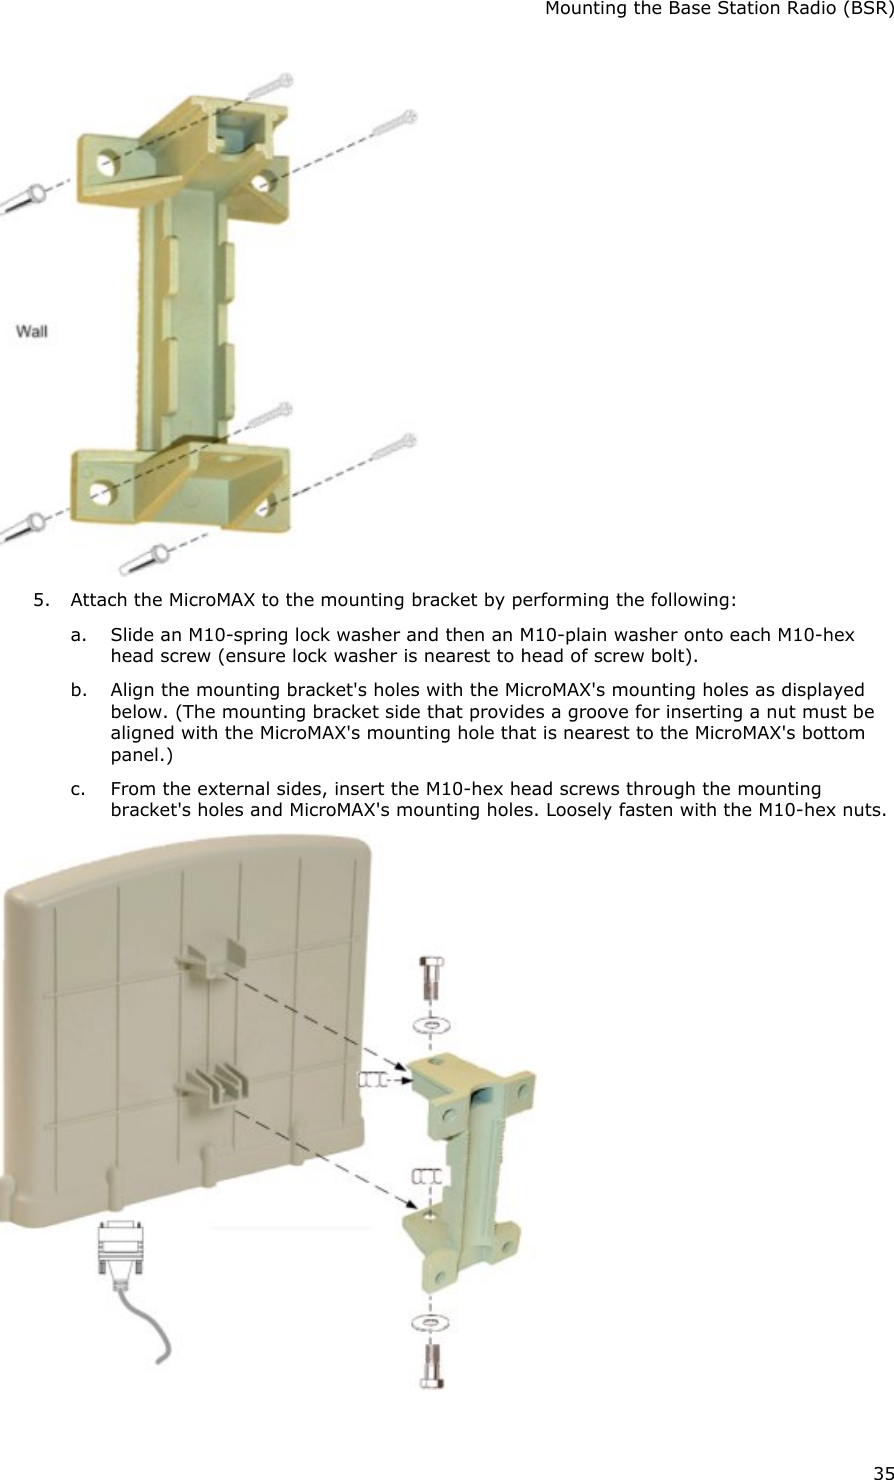 Mounting the Base Station Radio (BSR) 35  5. Attach the MicroMAX to the mounting bracket by performing the following: a. Slide an M10-spring lock washer and then an M10-plain washer onto each M10-hex head screw (ensure lock washer is nearest to head of screw bolt). b. Align the mounting bracket&apos;s holes with the MicroMAX&apos;s mounting holes as displayed below. (The mounting bracket side that provides a groove for inserting a nut must be aligned with the MicroMAX&apos;s mounting hole that is nearest to the MicroMAX&apos;s bottom panel.) c. From the external sides, insert the M10-hex head screws through the mounting bracket&apos;s holes and MicroMAX&apos;s mounting holes. Loosely fasten with the M10-hex nuts.  